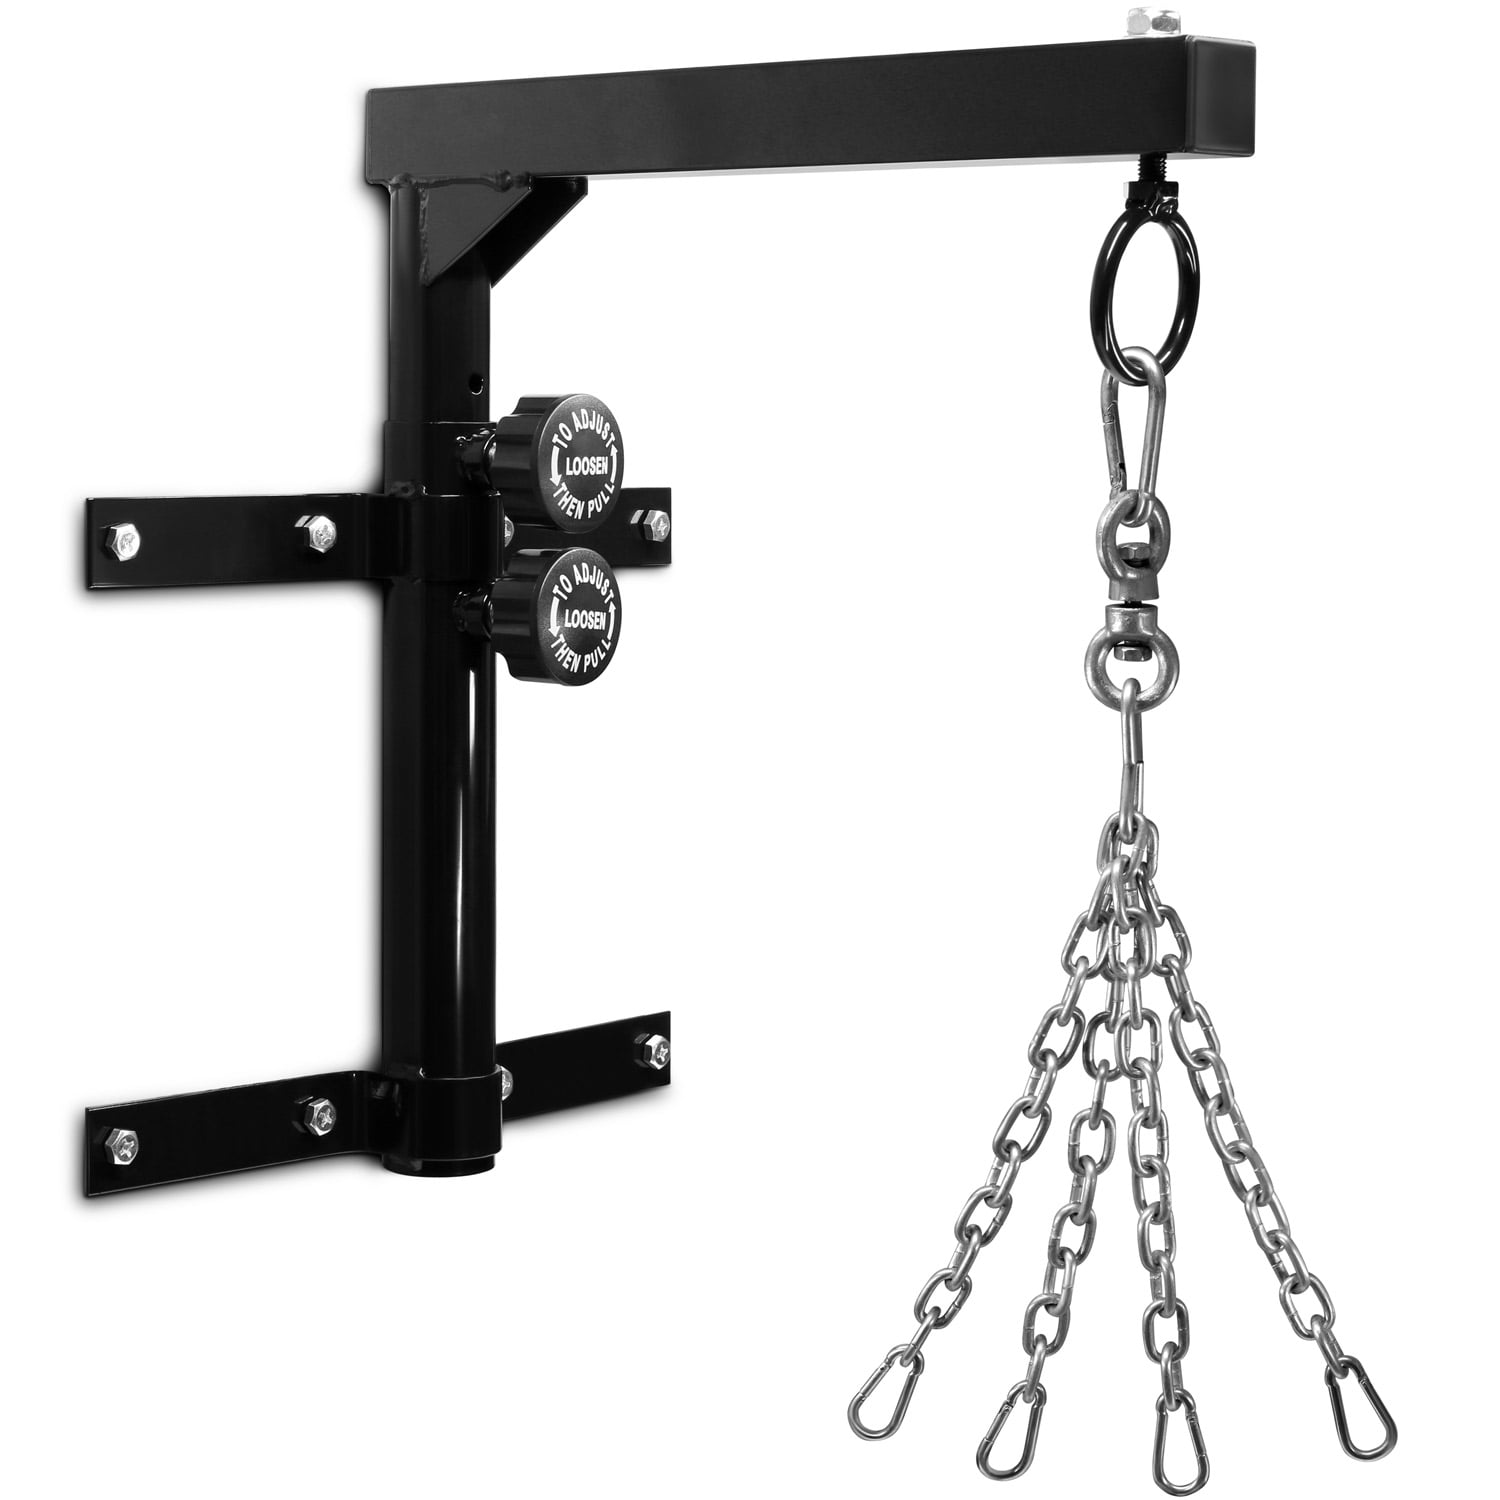 Heavy Bag Boxing Duty Punching Chains Training Us Chain Hanging Swivel up 150lbs 